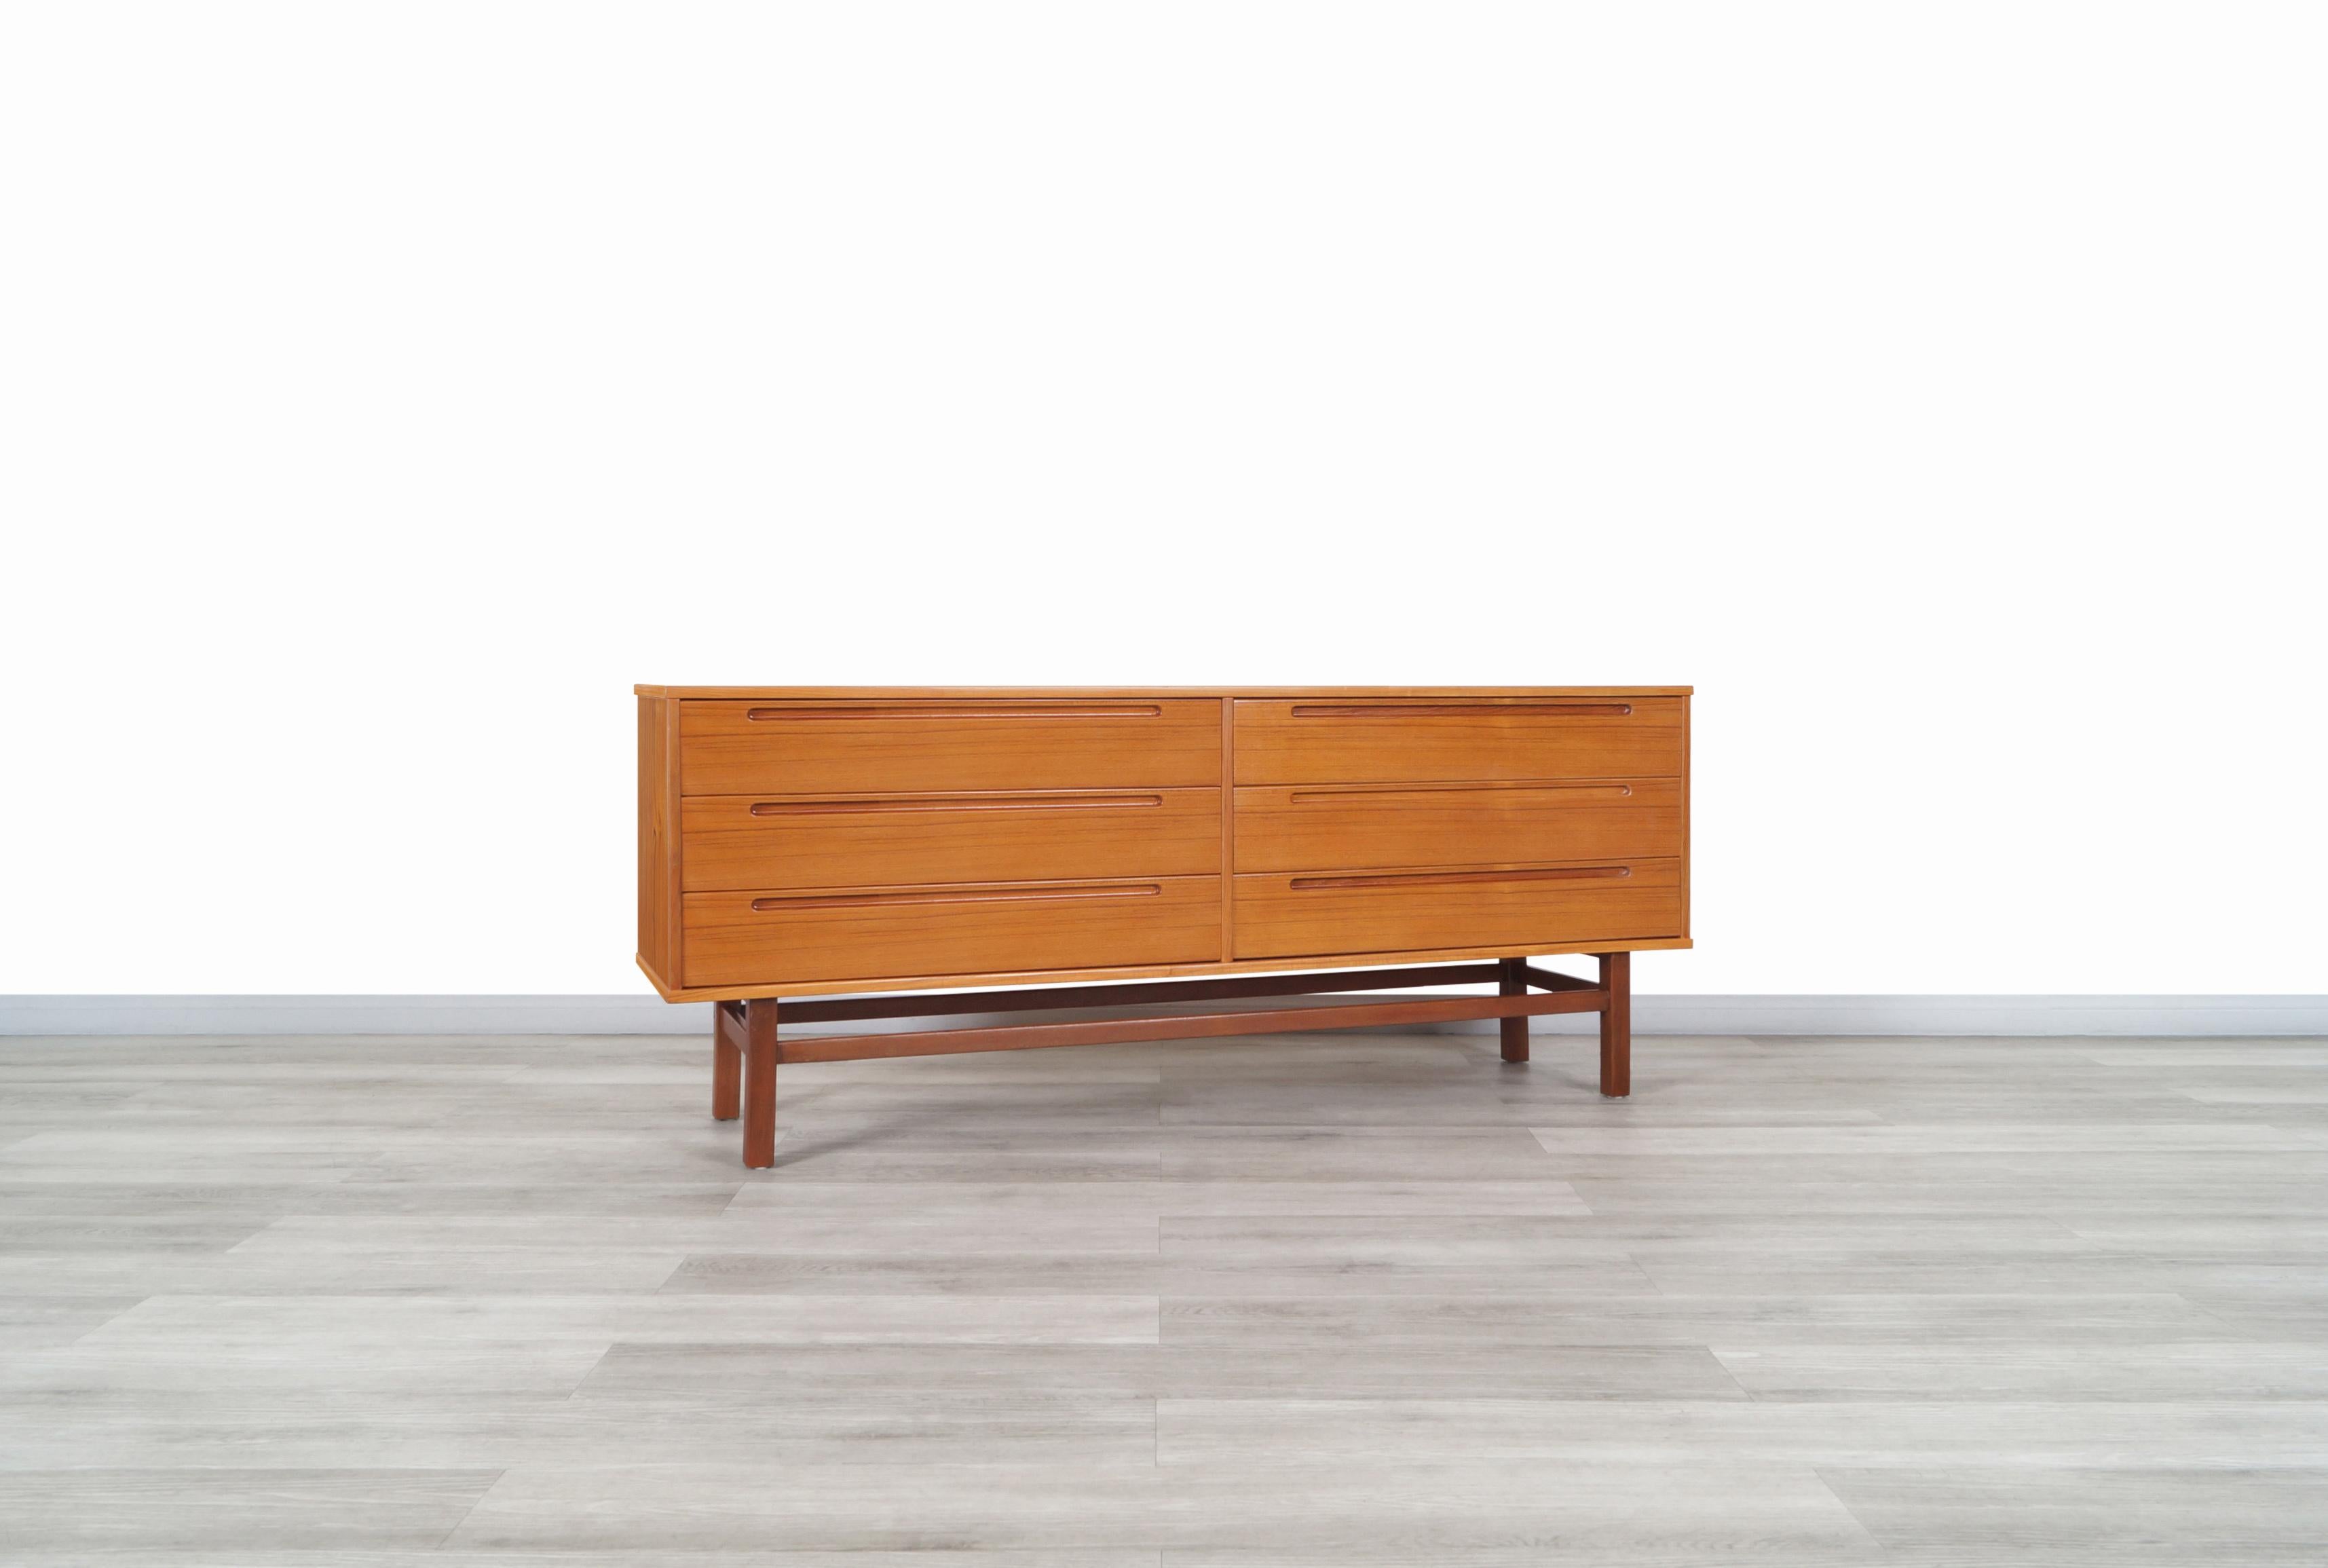 Exceptional Danish modern teak dresser designed by Nils Jonsson for HJN Møbler in Sweden, circa 1960s. This dresser has been constructed from fine teak wood and features a minimalist yet highly functional design. Features a total of 6 large drawers